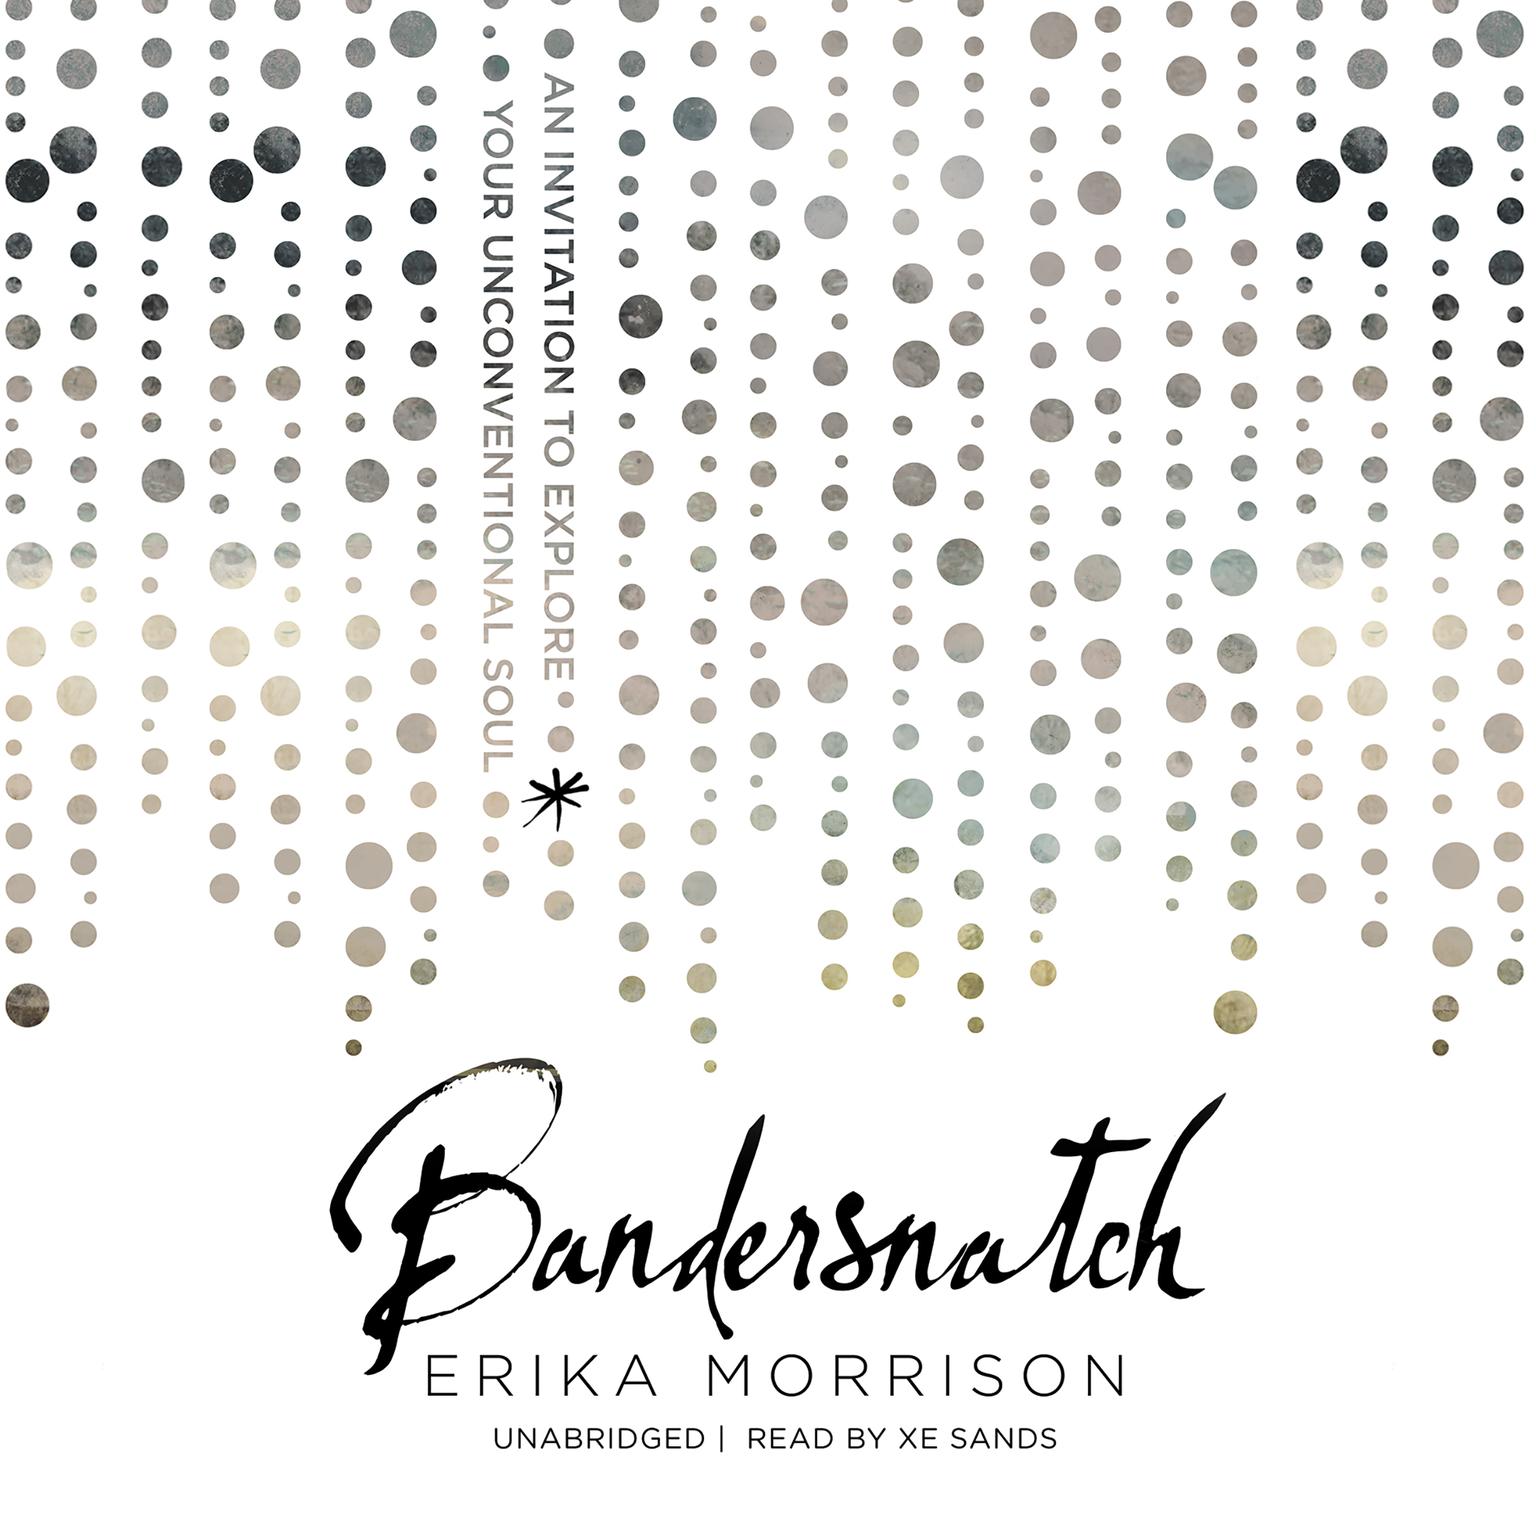 Bandersnatch: An Invitation to Explore Your Unconventional Soul Audiobook, by Erika Morrison